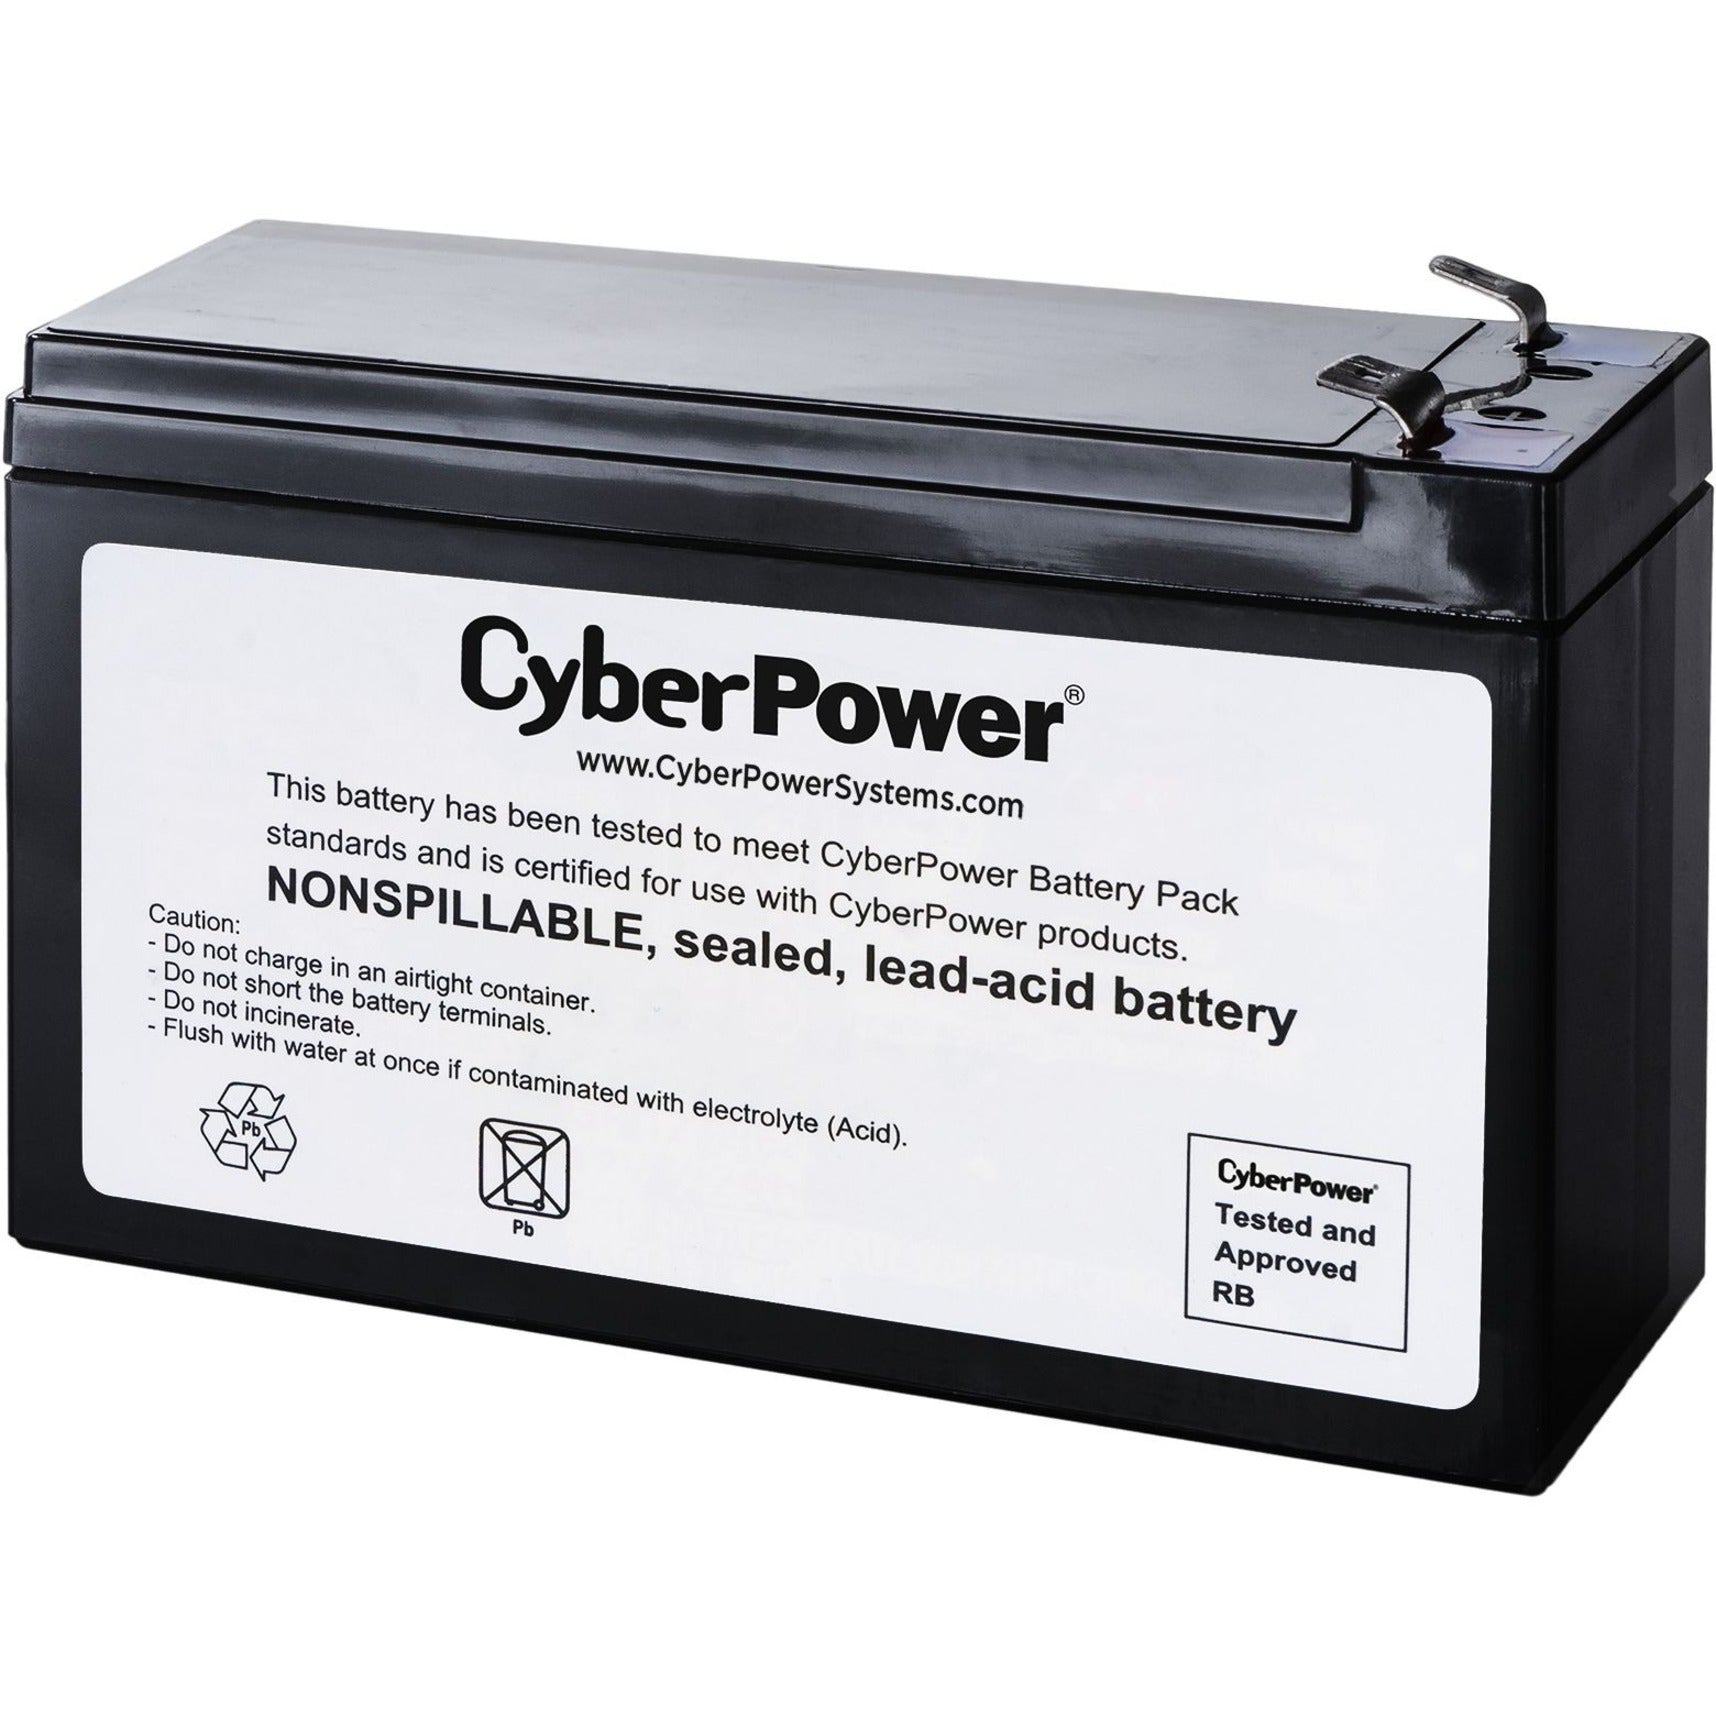 CyberPower RB1280A UPS Replacement Battery Cartridge, 18 Month Warranty, 8000mAh, Lead Acid